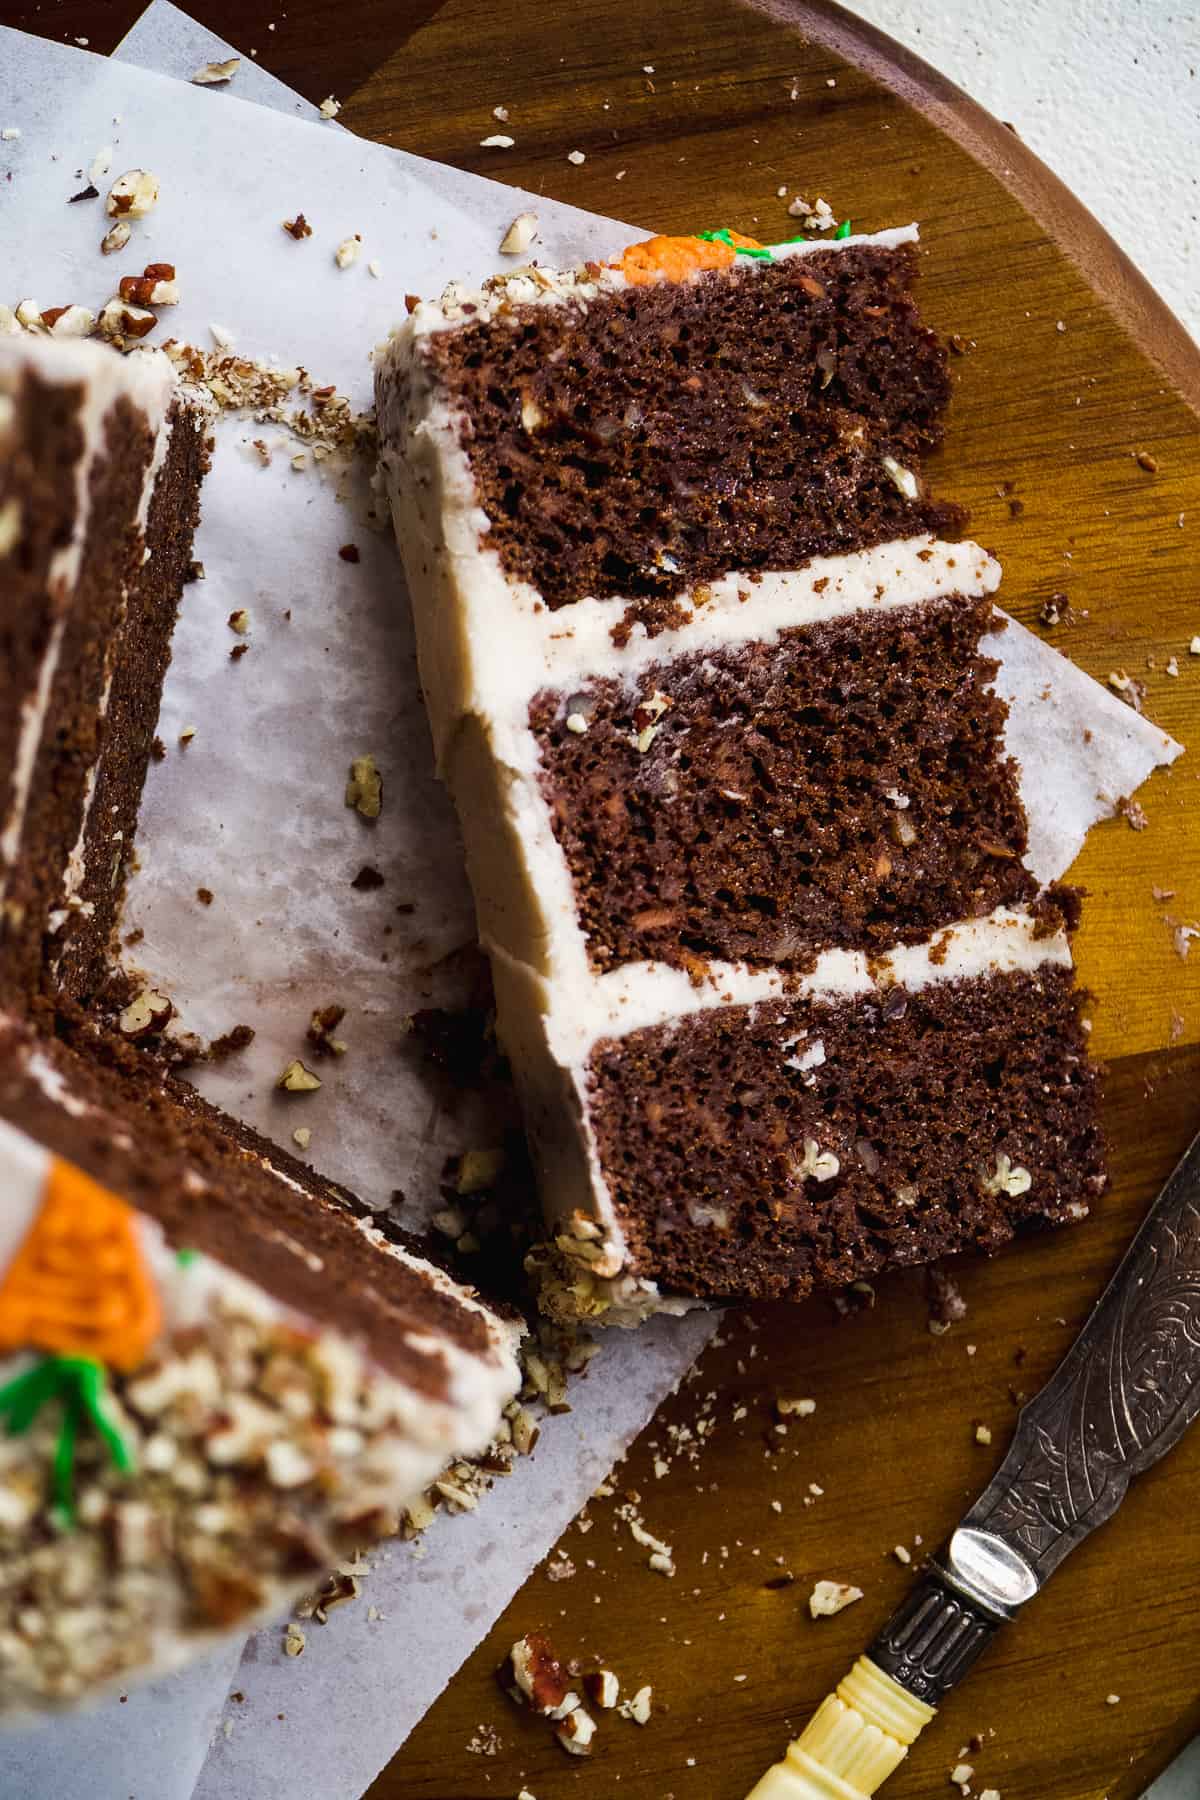 Overhead view of a slice of chocolate carrot cake on a wooden platter.